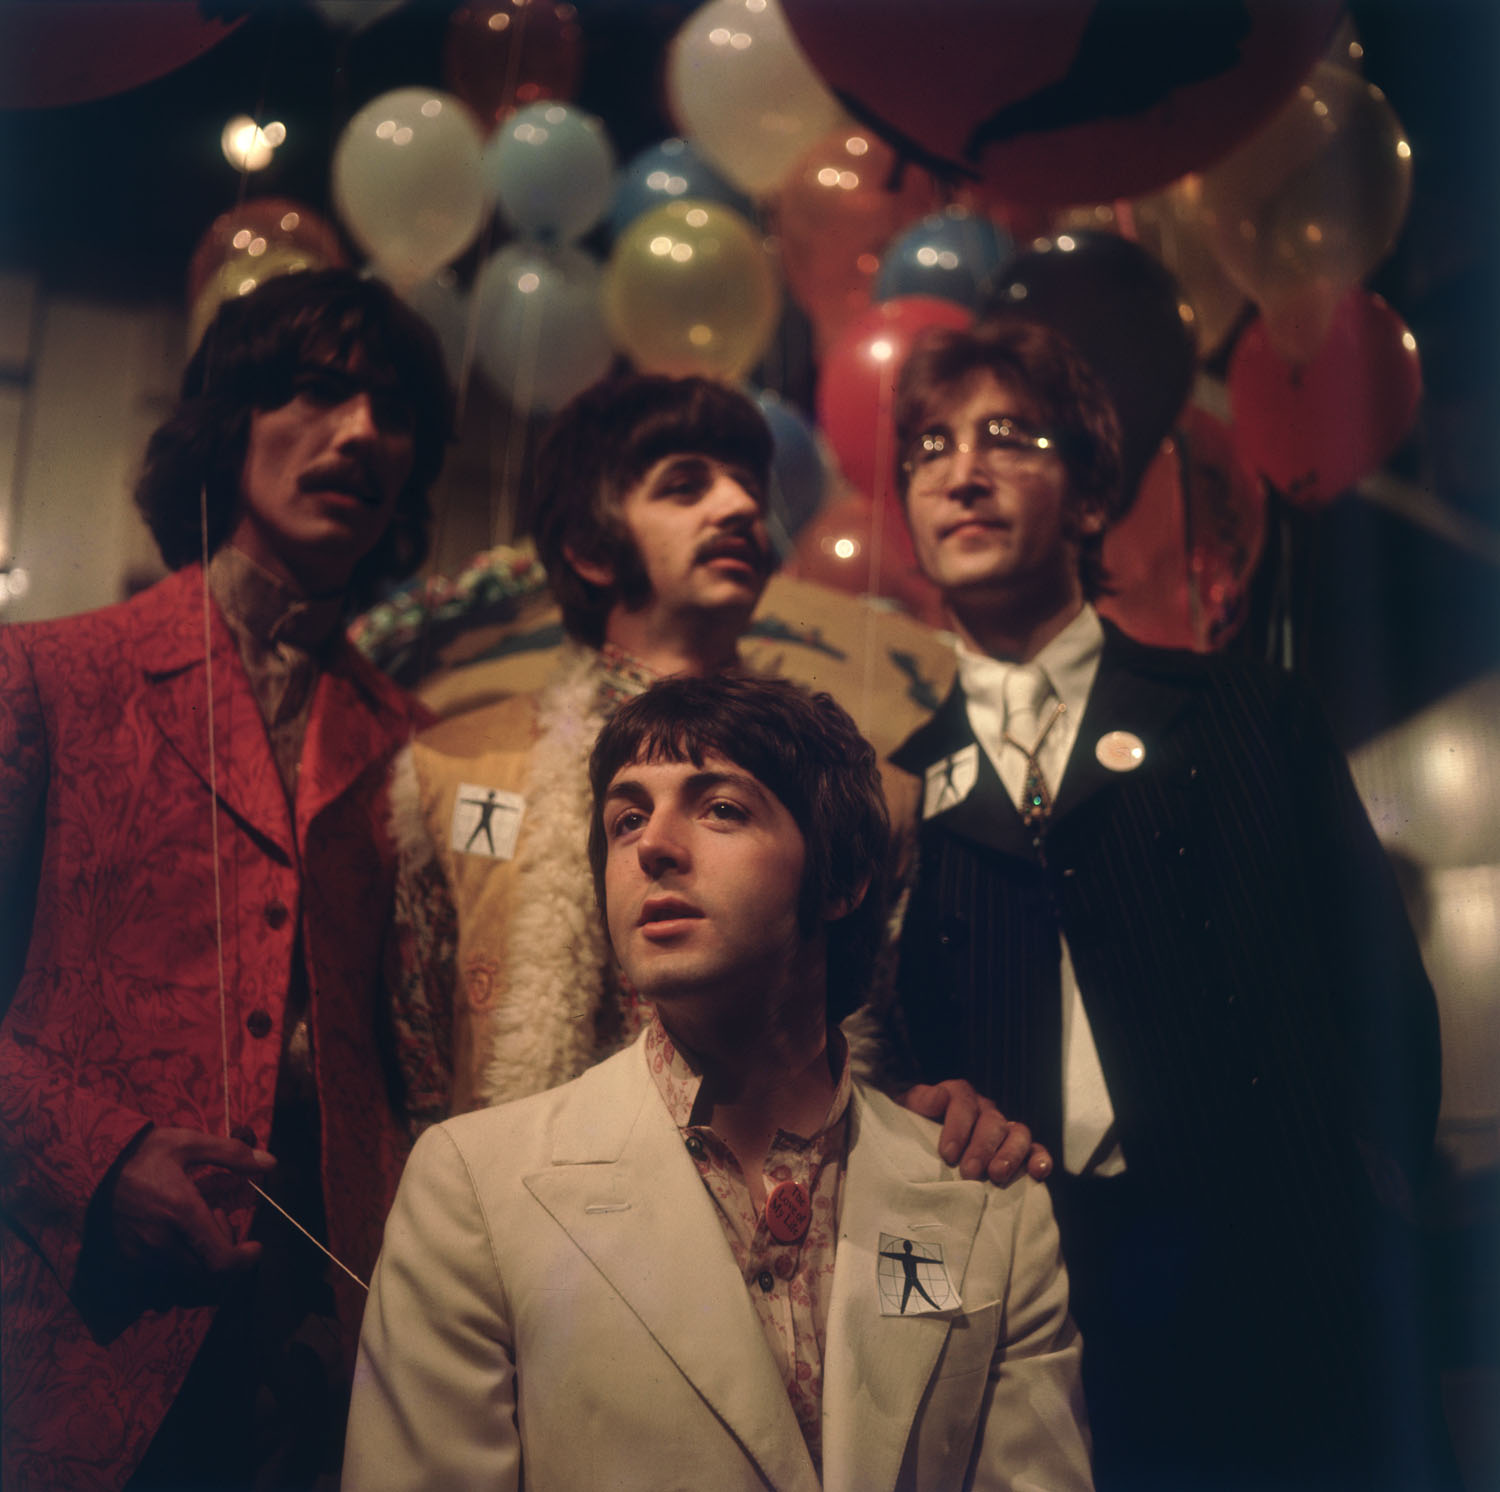 The Beatles,from left to right, George Harrison, Ringo Starr, John Lennon, and in front, Paul McCartney, at the EMI studios in Abbey Road, as they prepare for 'Our World', a world-wide live television show broadcasting to 24 countries with a potential audience of 400 million. June 25, 1967. London, England.